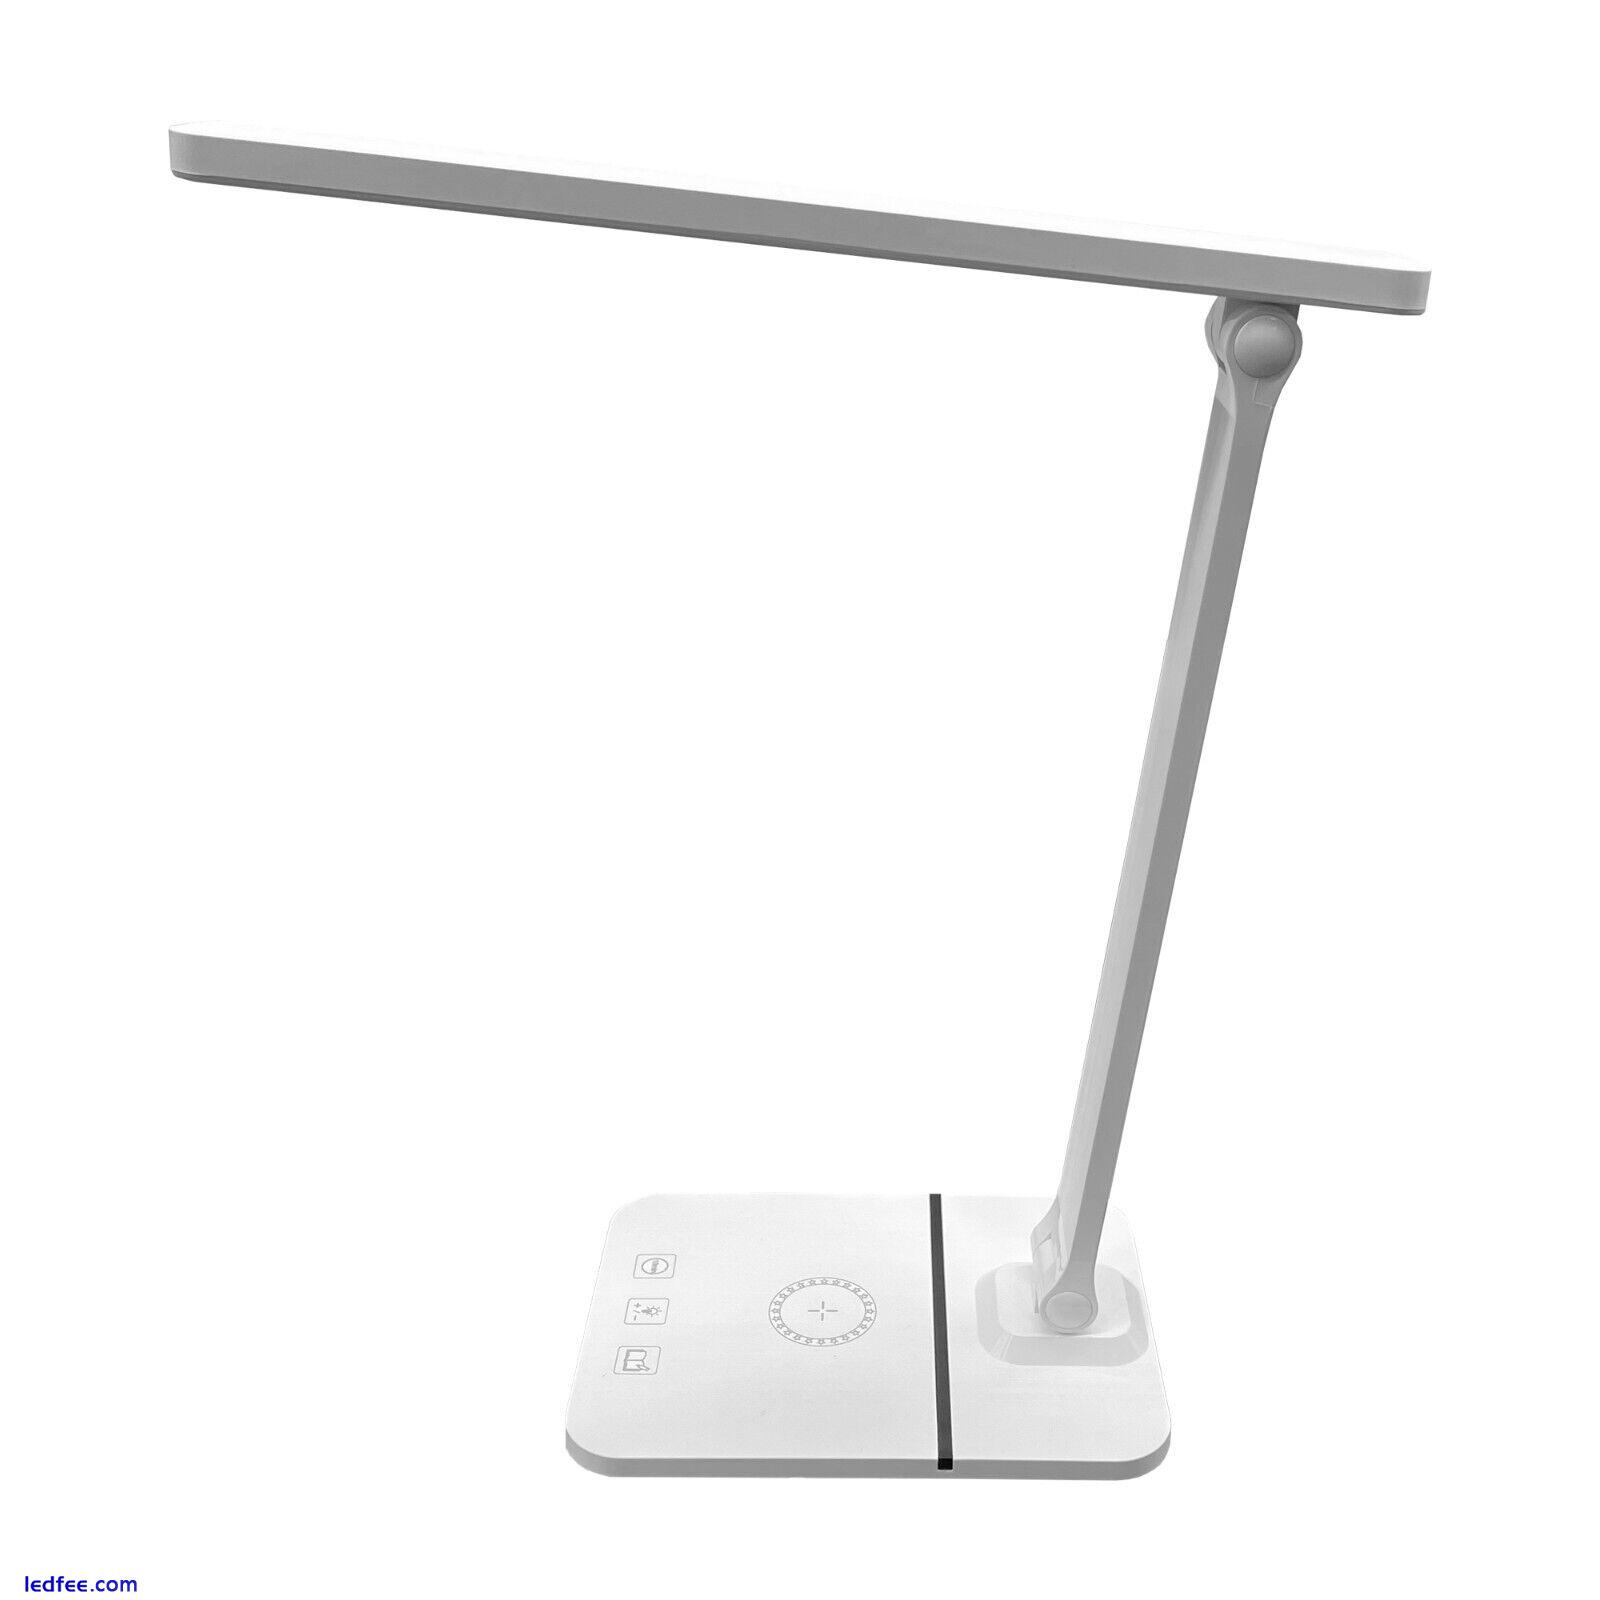 LED DESK LAMP WITH WIRELESS CHARGING USB PORT Dimmable Eye Caring Bedside Lamp 4 